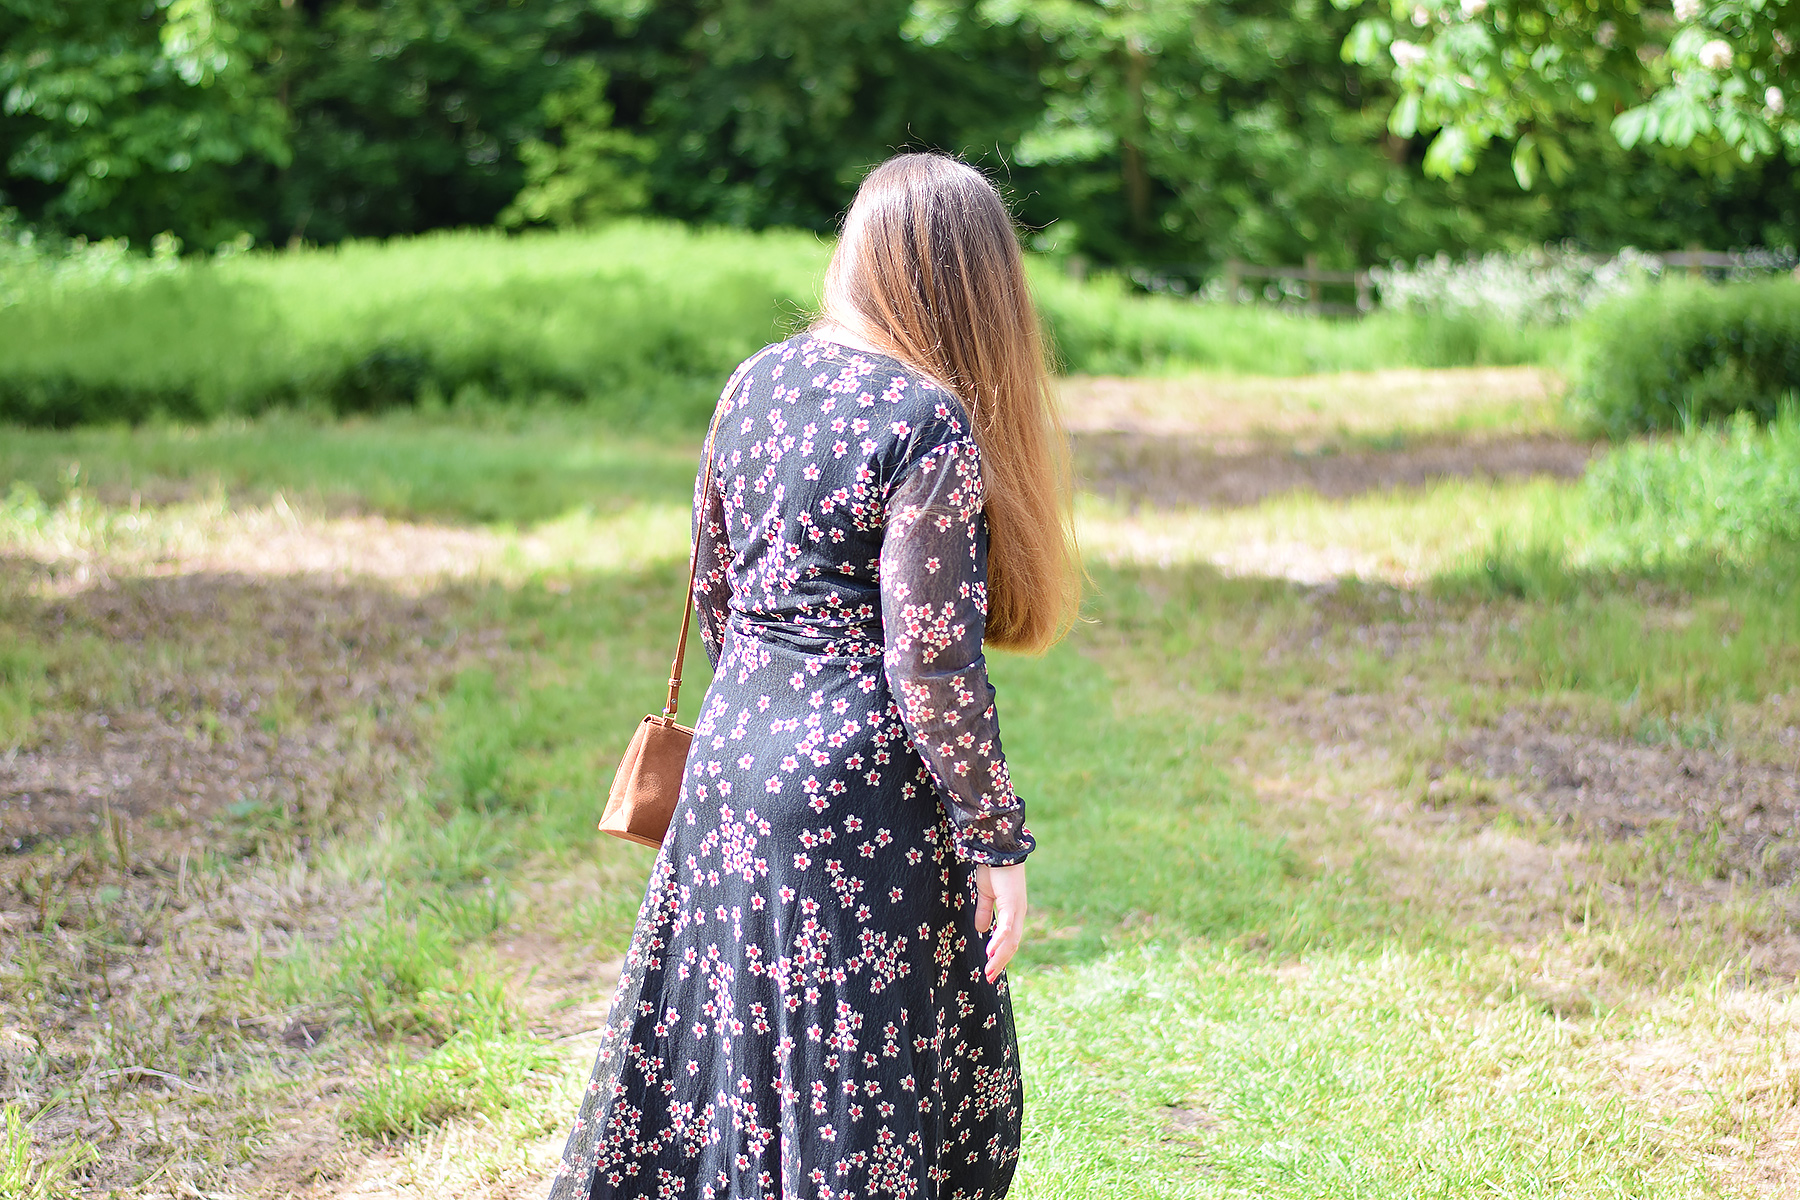 How to wear a black floral dress in summer